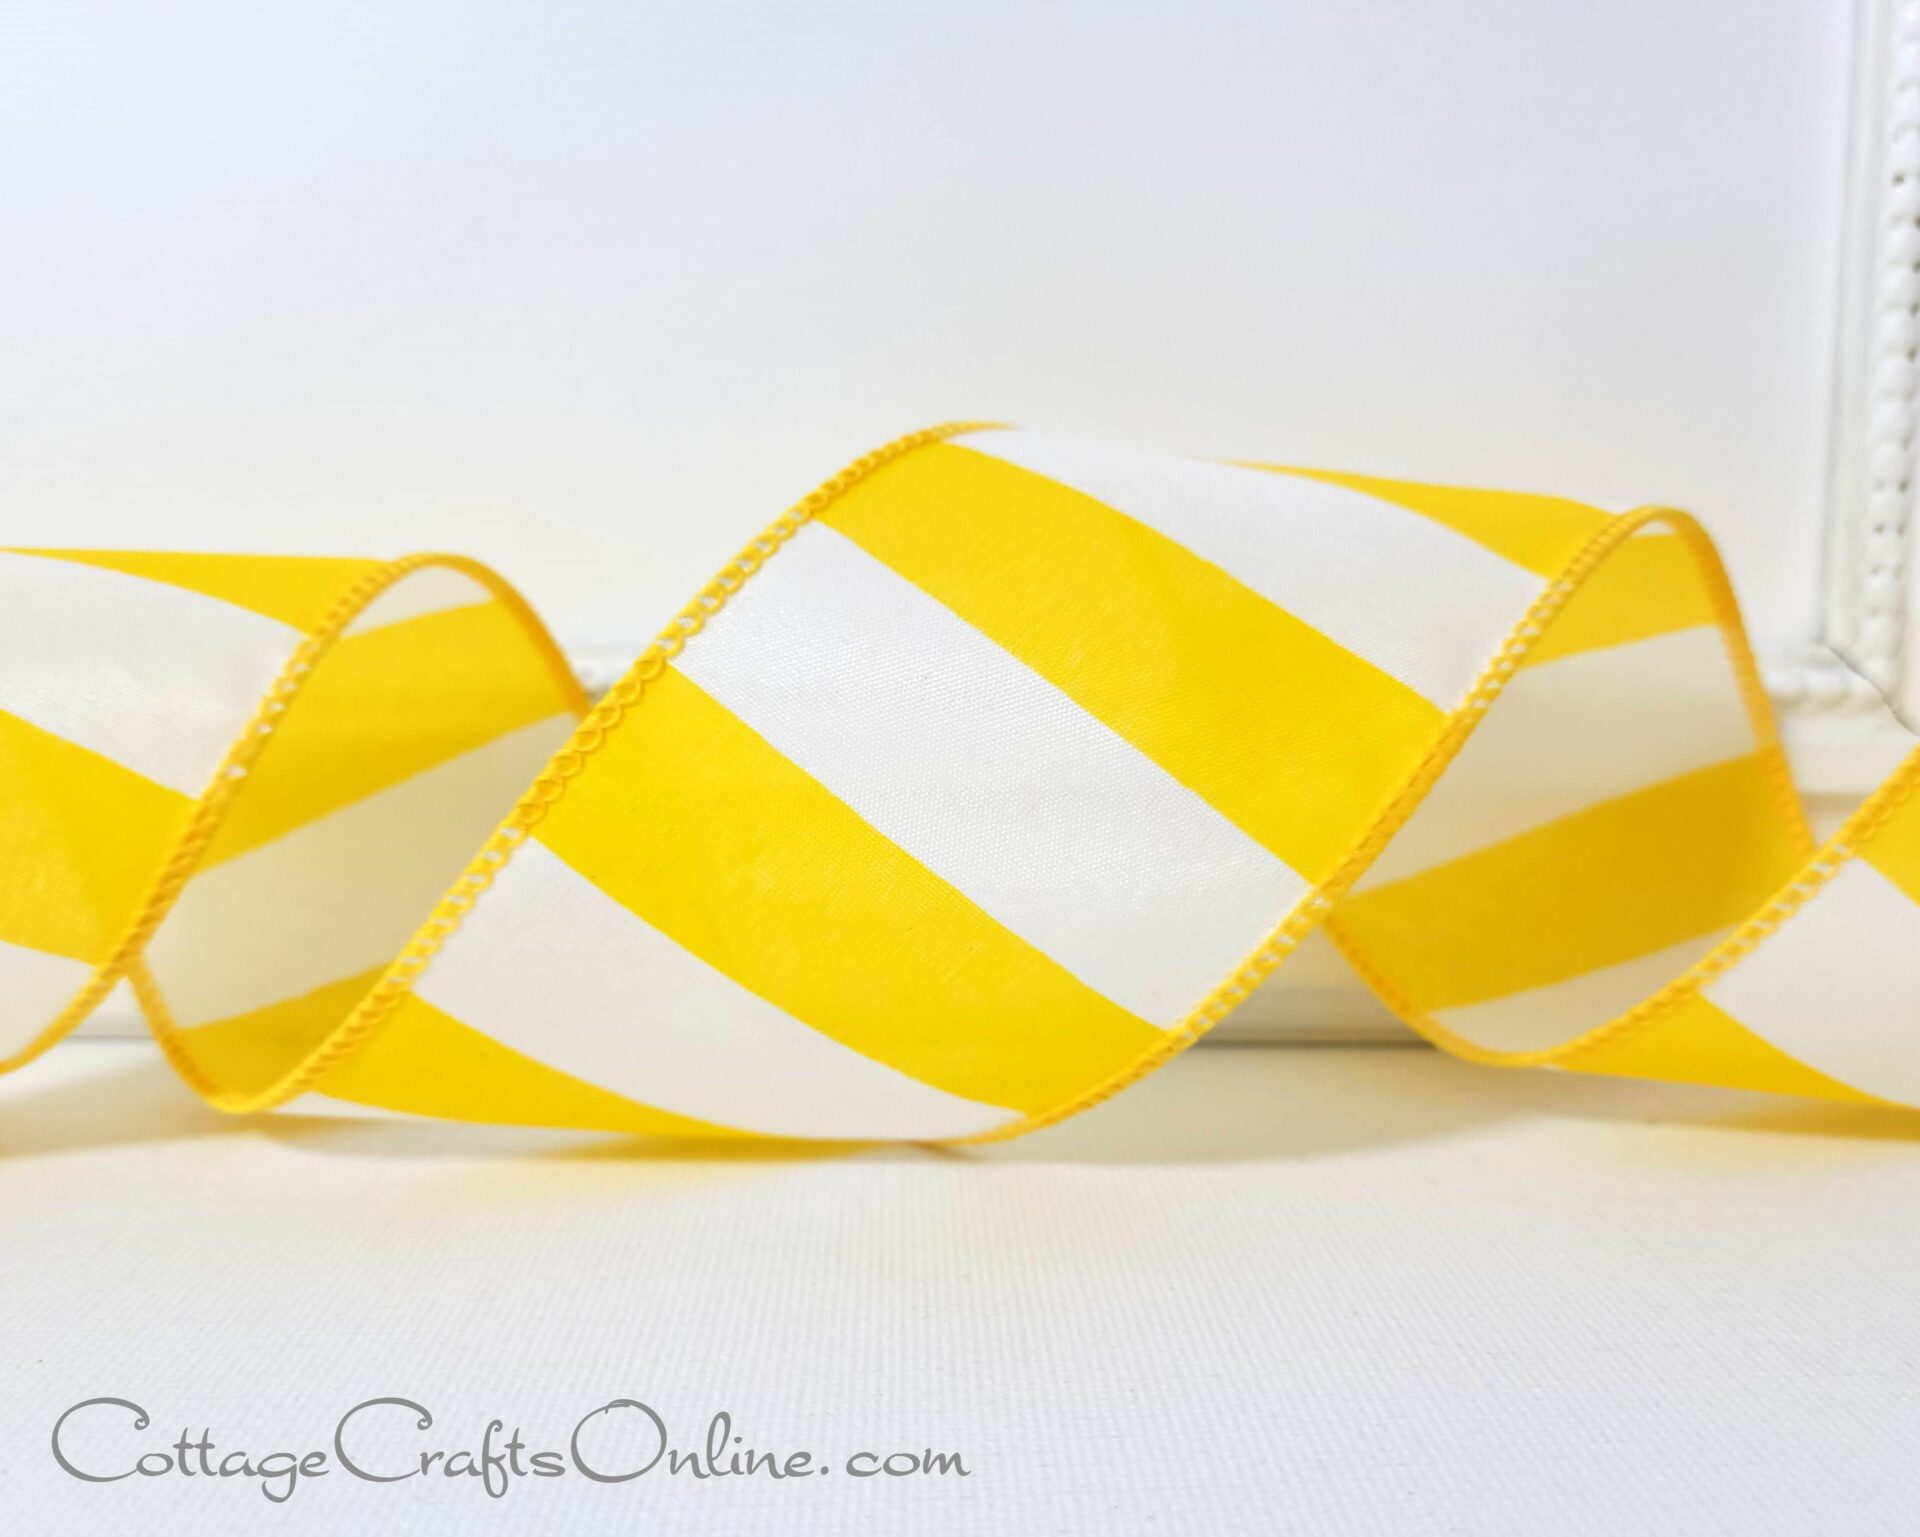 A ribbon with yellow stripes